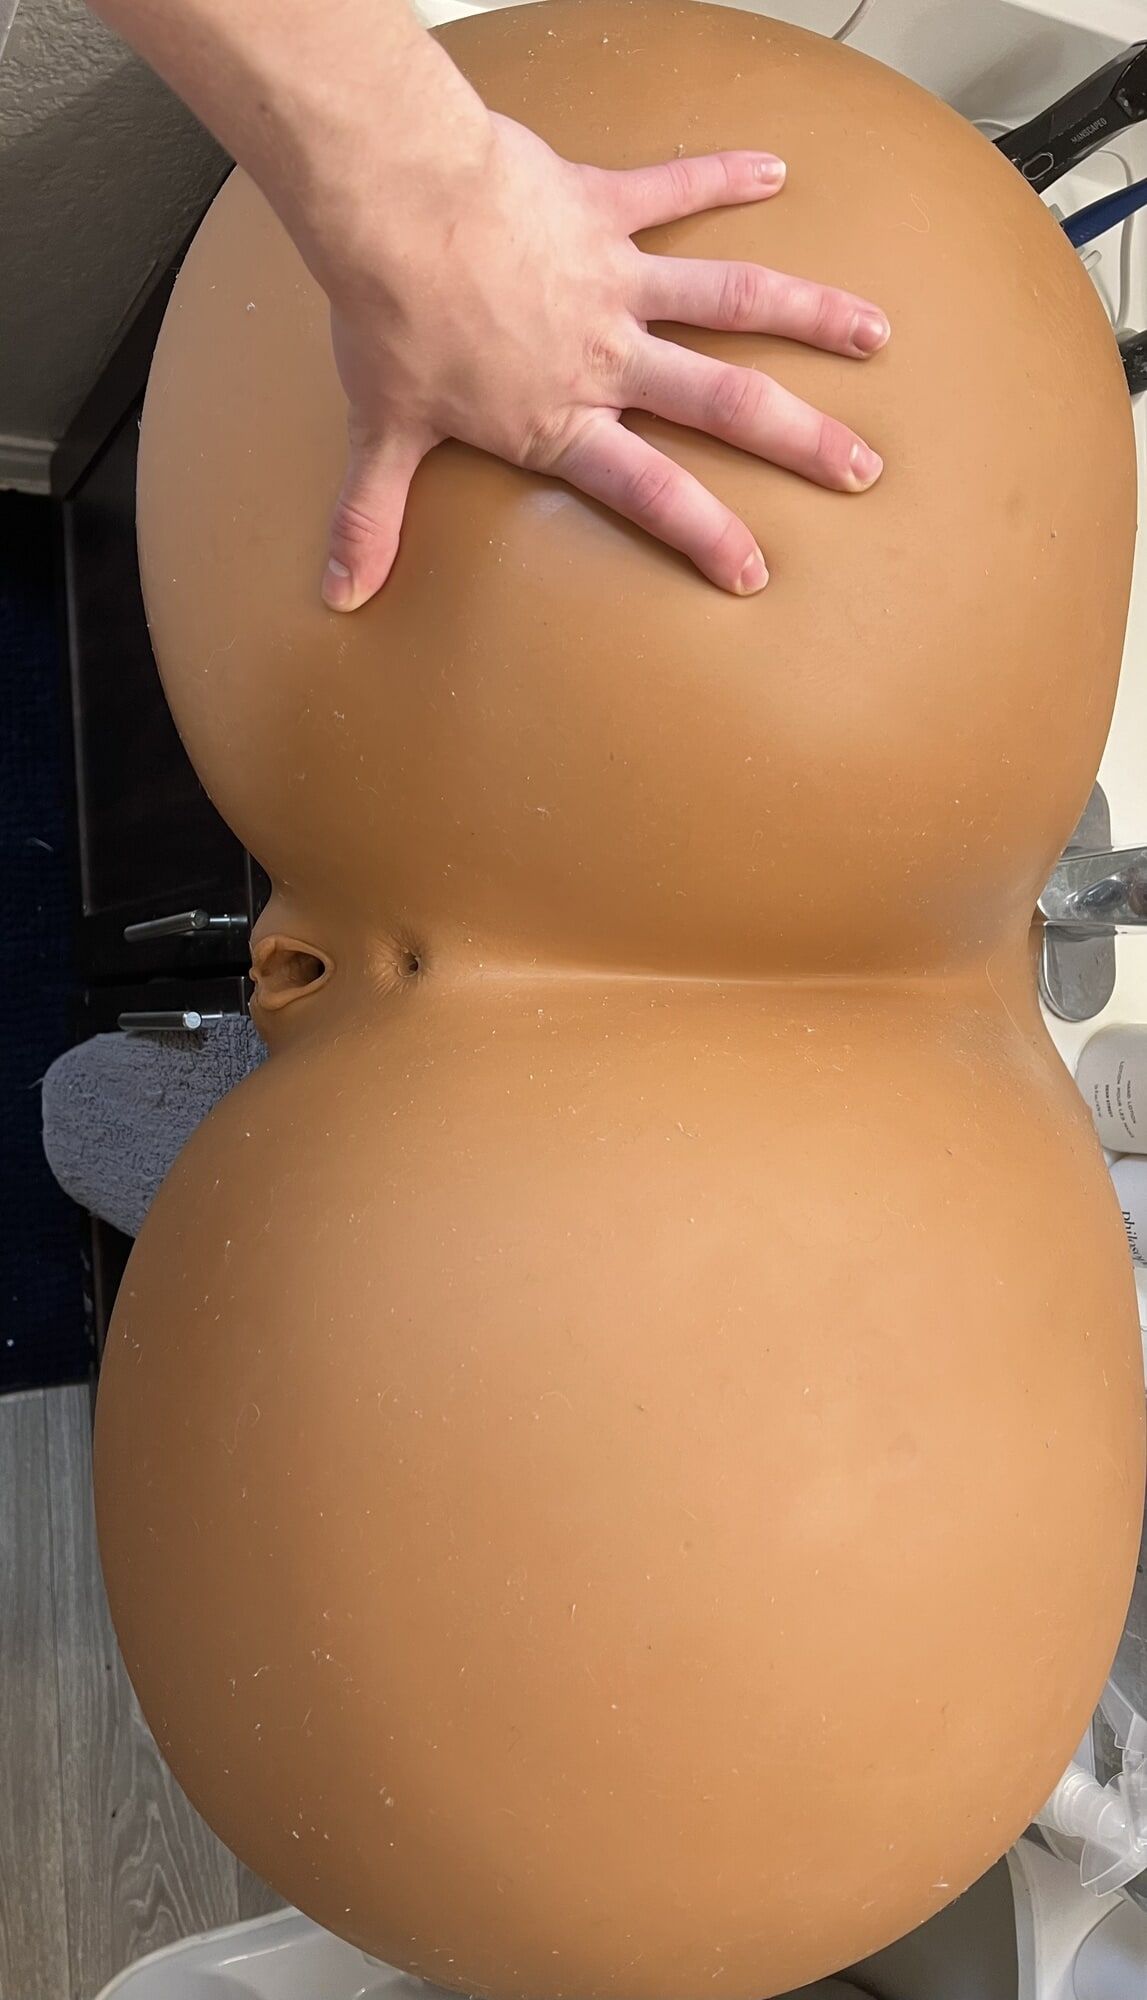 Showing Off the Immense Ass of the R3 CLM Sexdoll #6